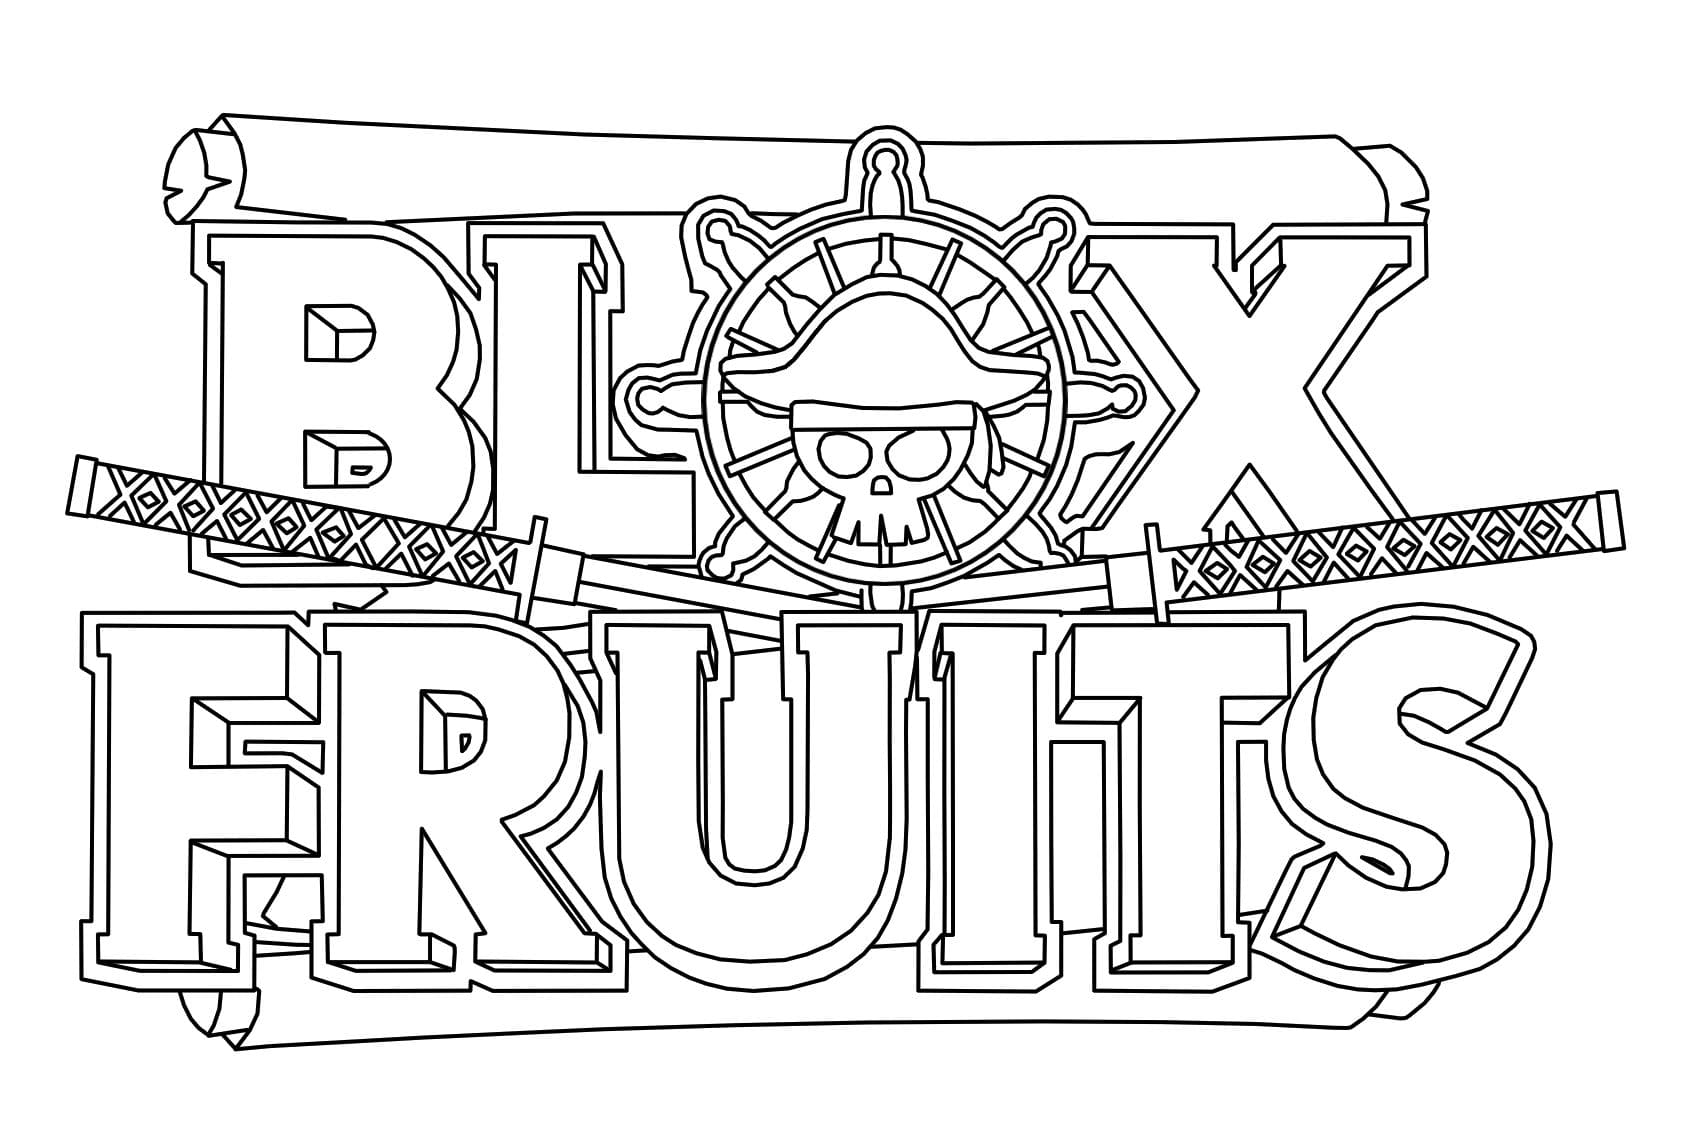 Blox Fruits – 로고 coloring page